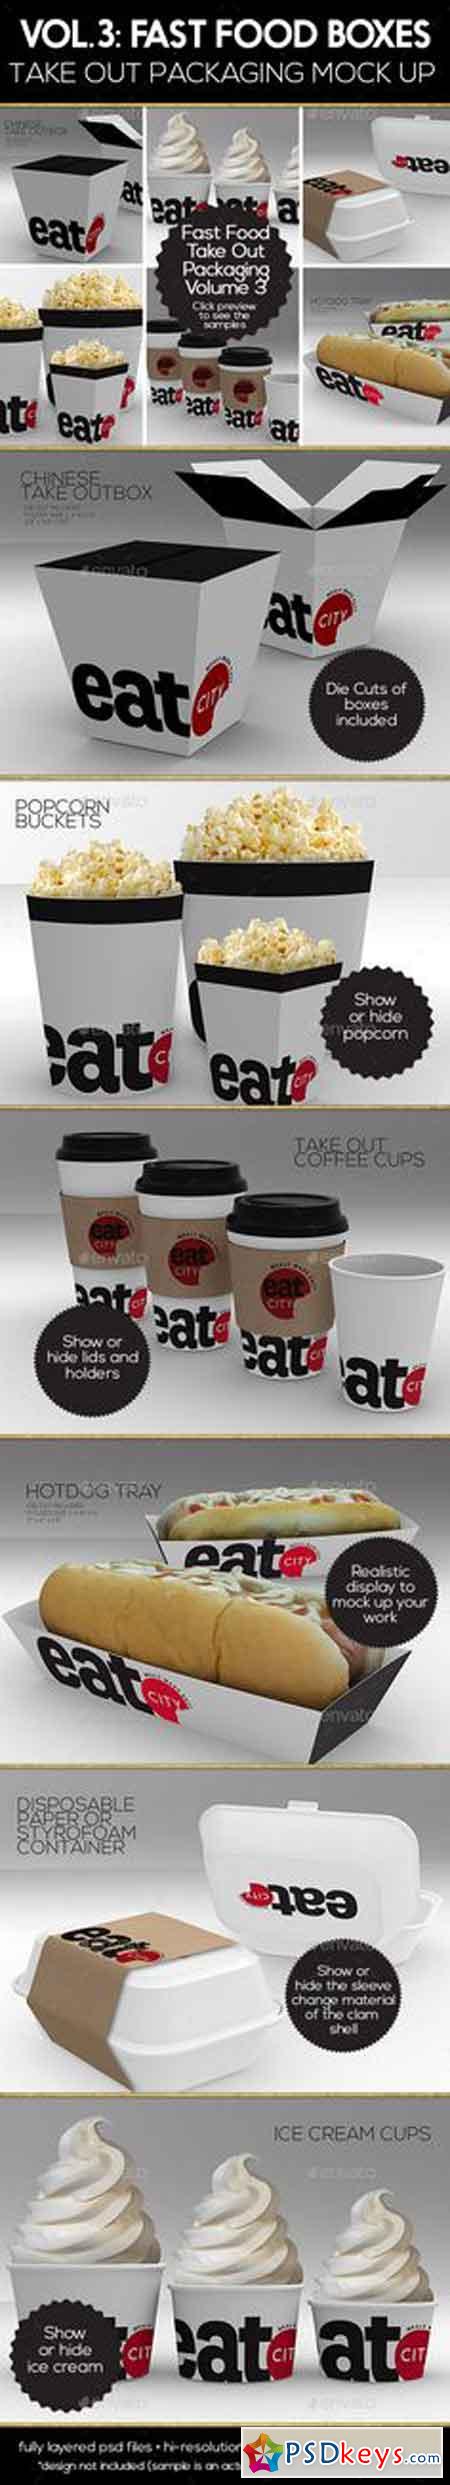 Fast Food Boxes Vol.3 Take Out Packaging Mock Ups 17838720